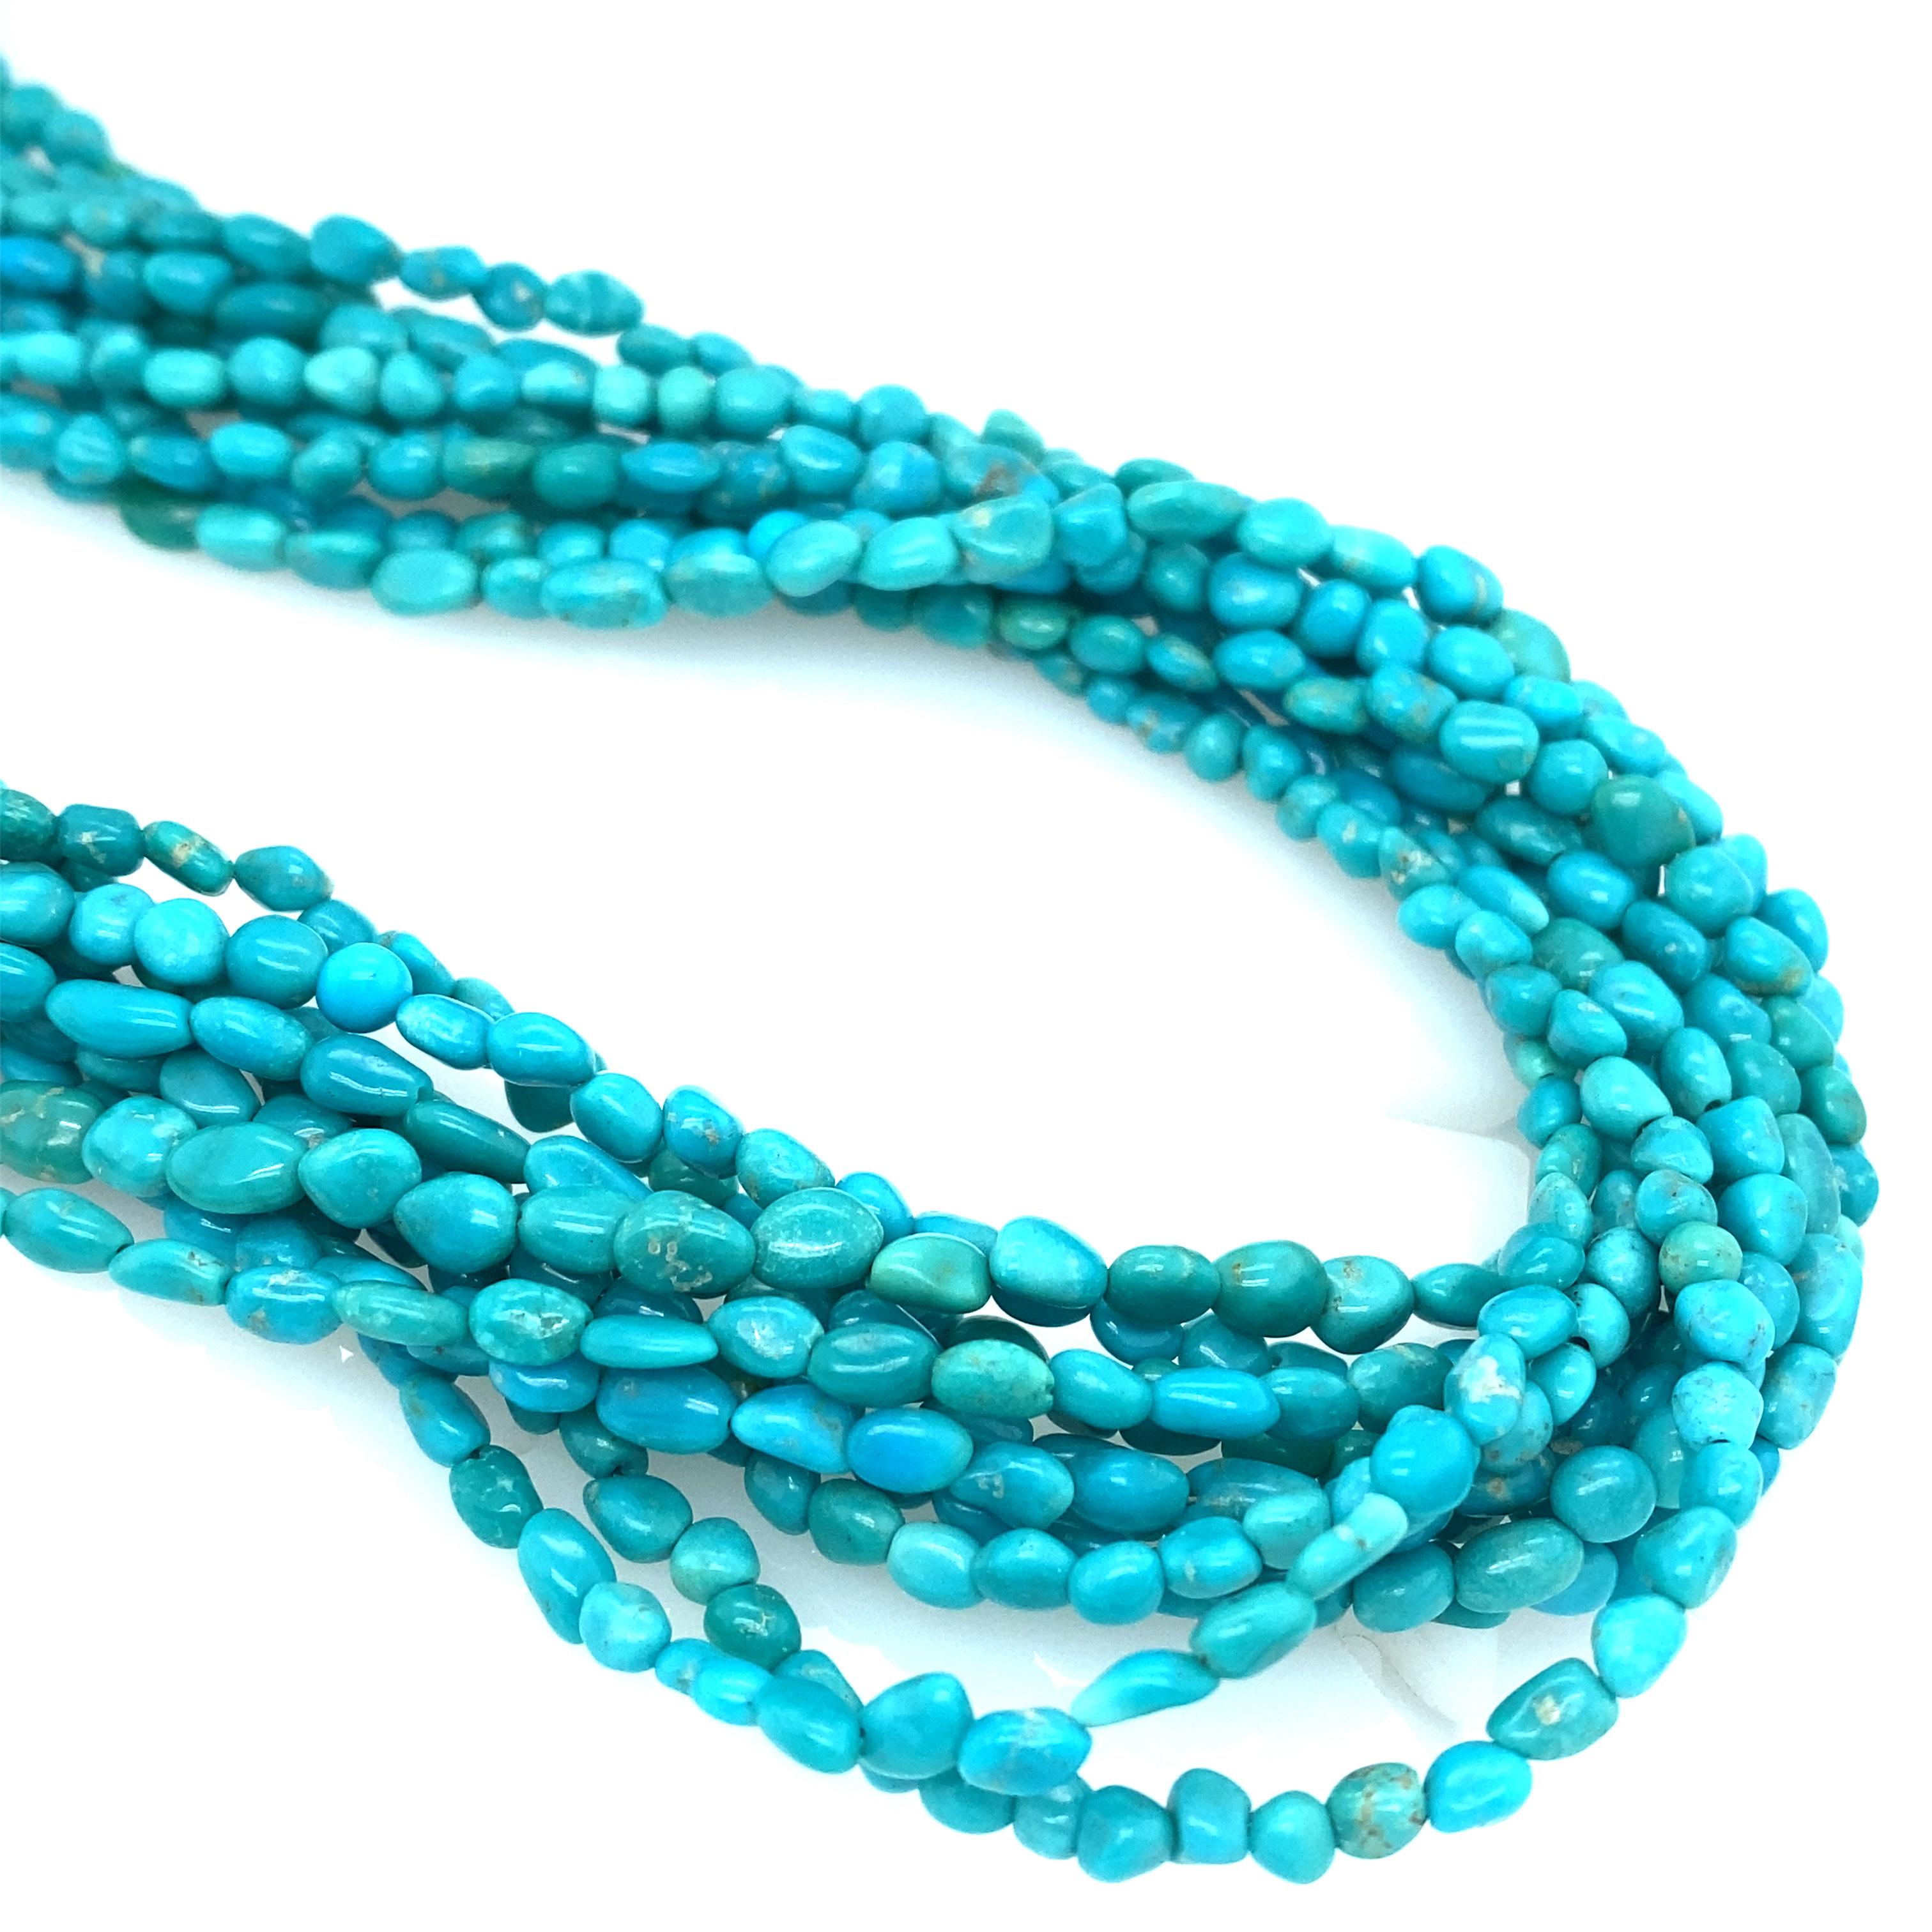 Women's or Men's Southwestern Multi Strand Turquoise Necklace in Sterling Silver